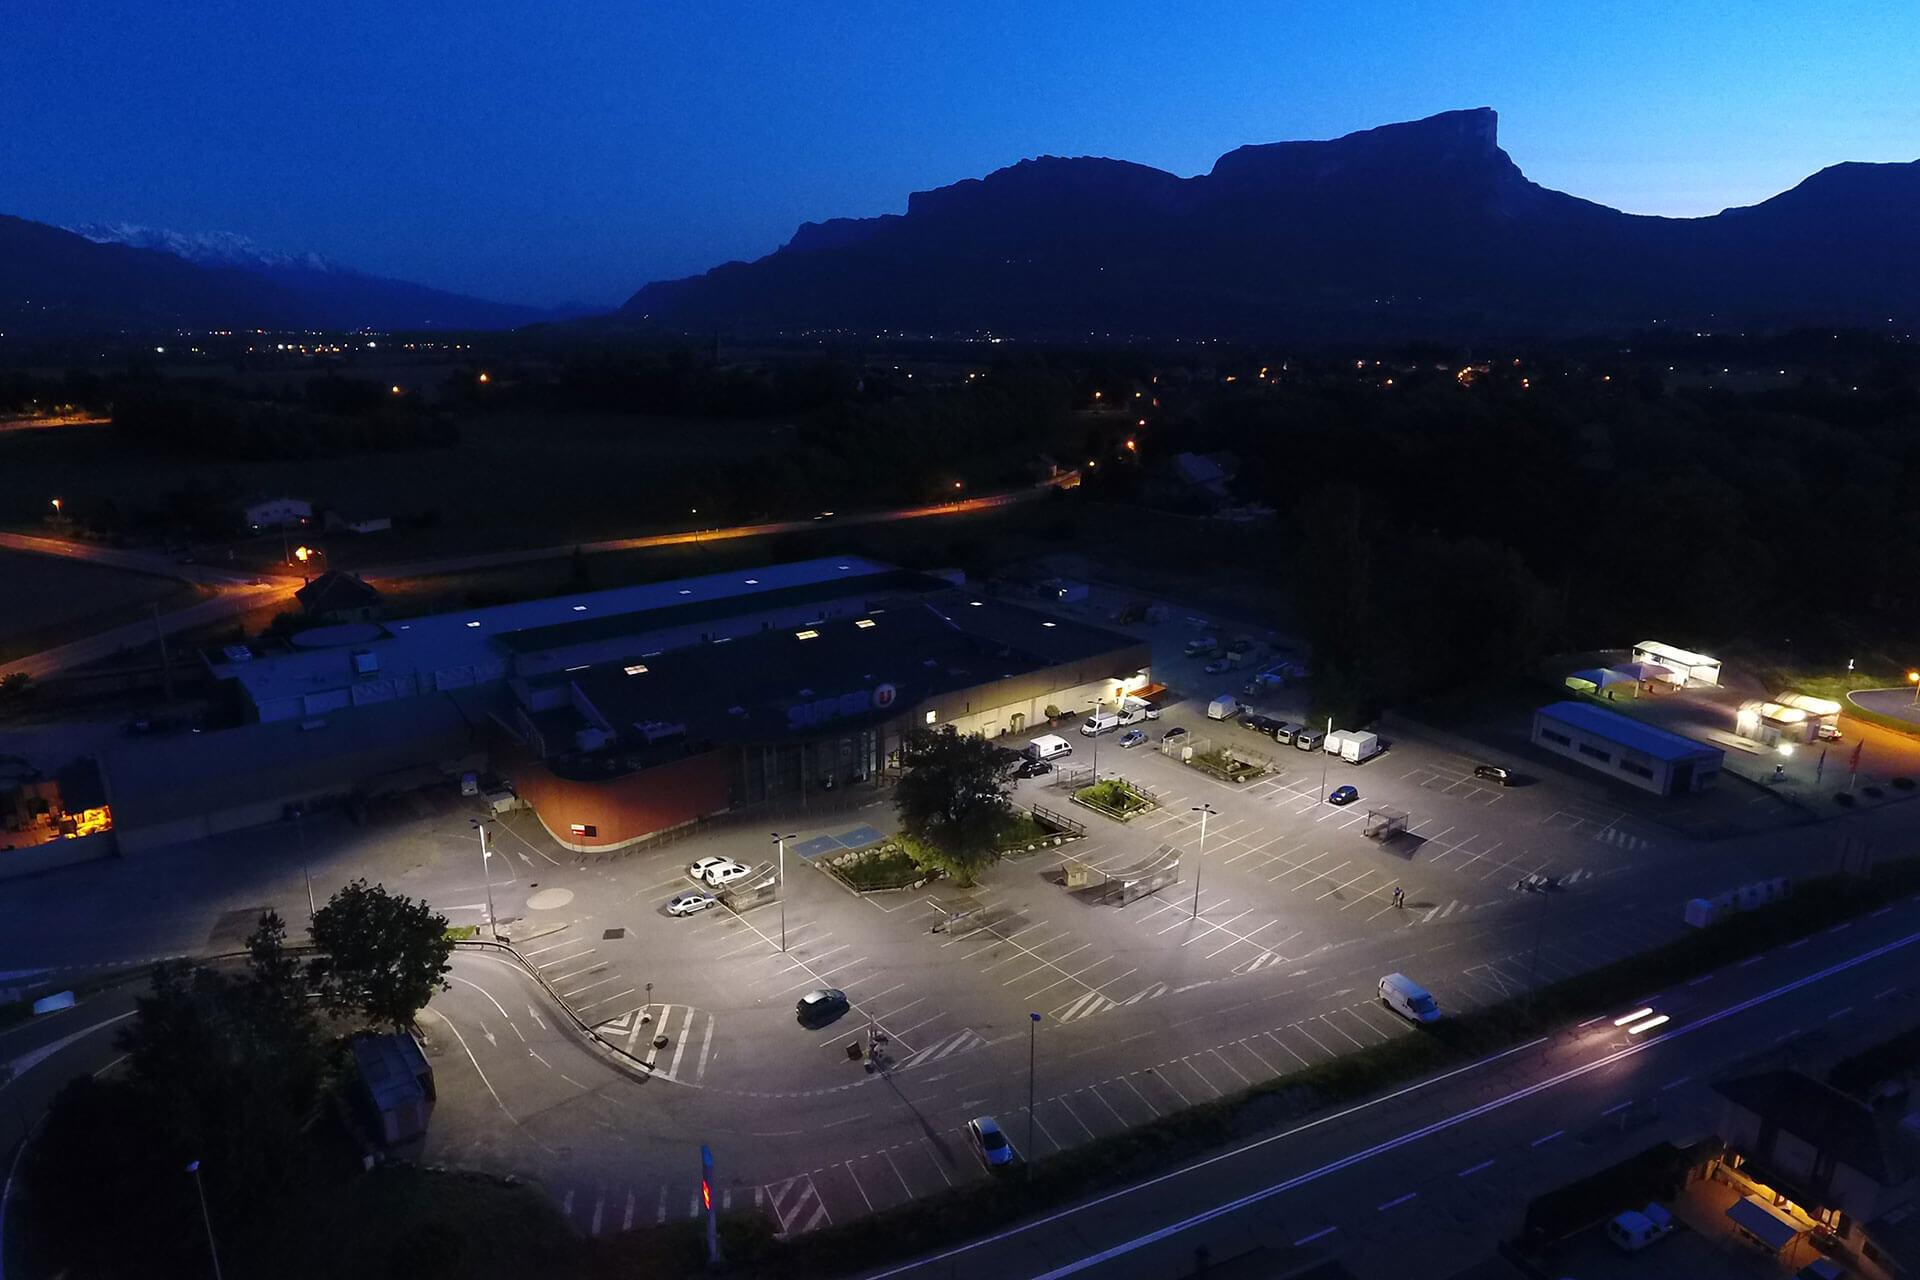 Schréder LED luminaires deliver a sustainable lighting solution, reducing any light spill, for this supermarket car park in Montmelian